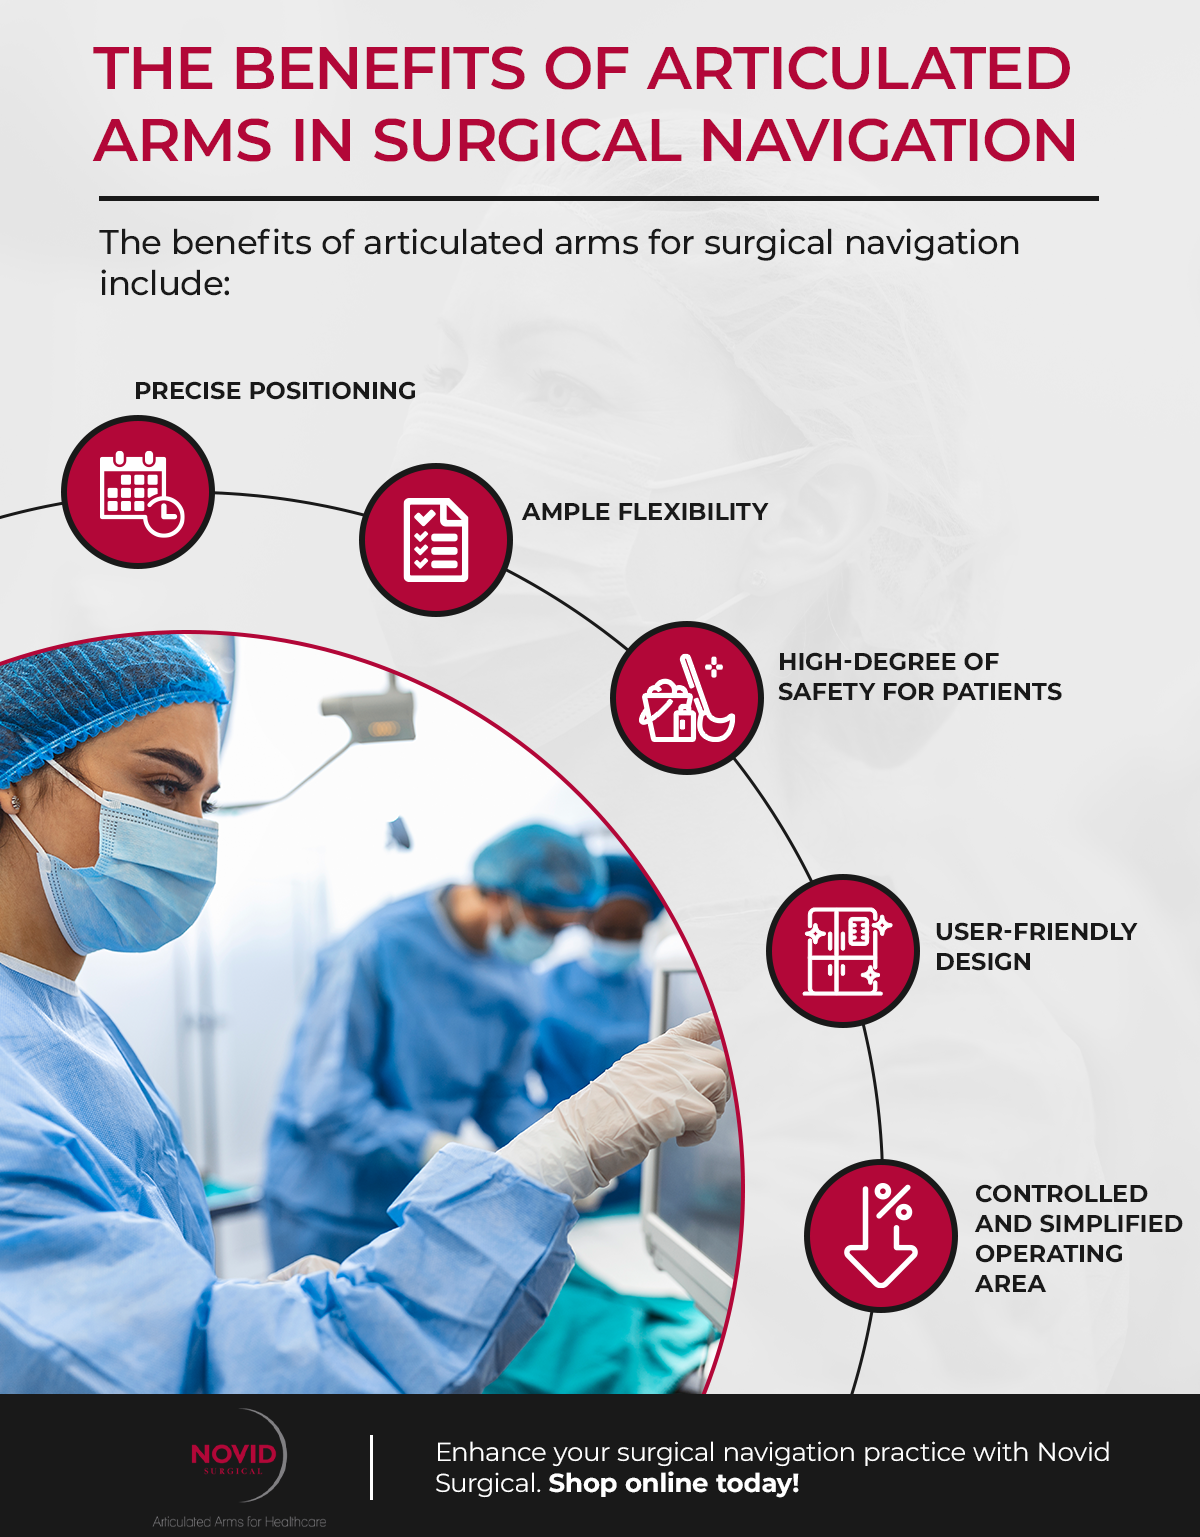 The Benefits of Articulated Arms in Surgical Navigation